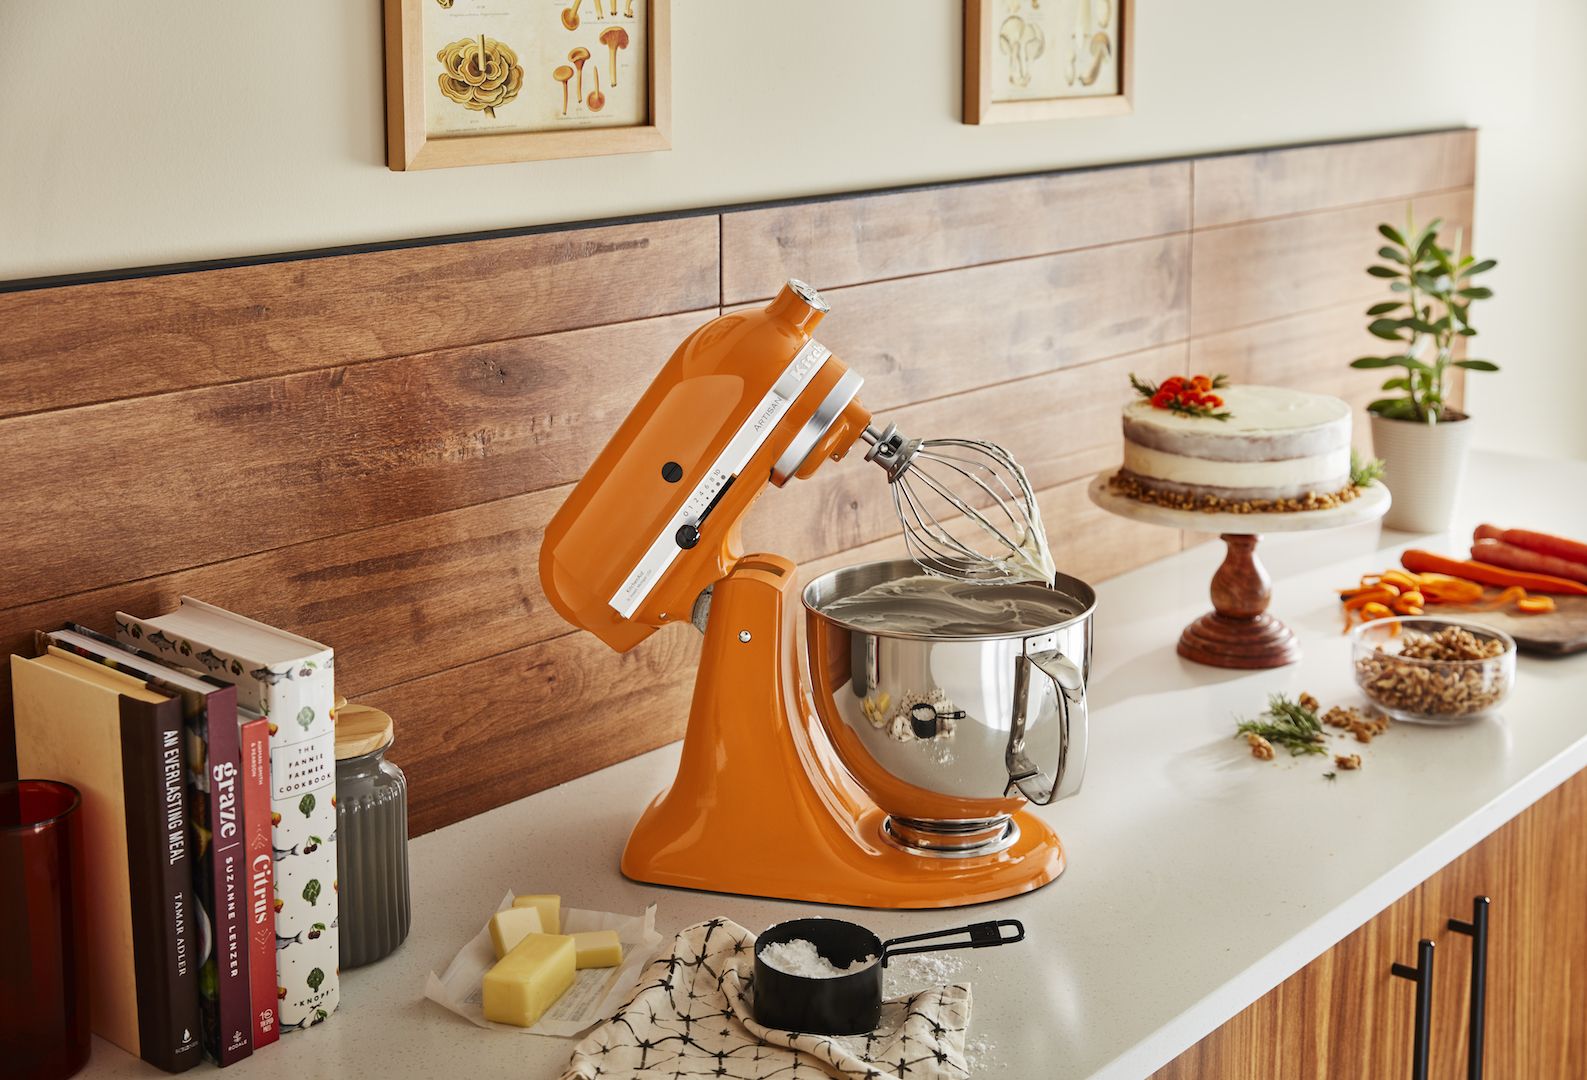 Shop KitchenAid\'s New Stand Color Mixer the Year KitchenAid of 2021 in Honey 